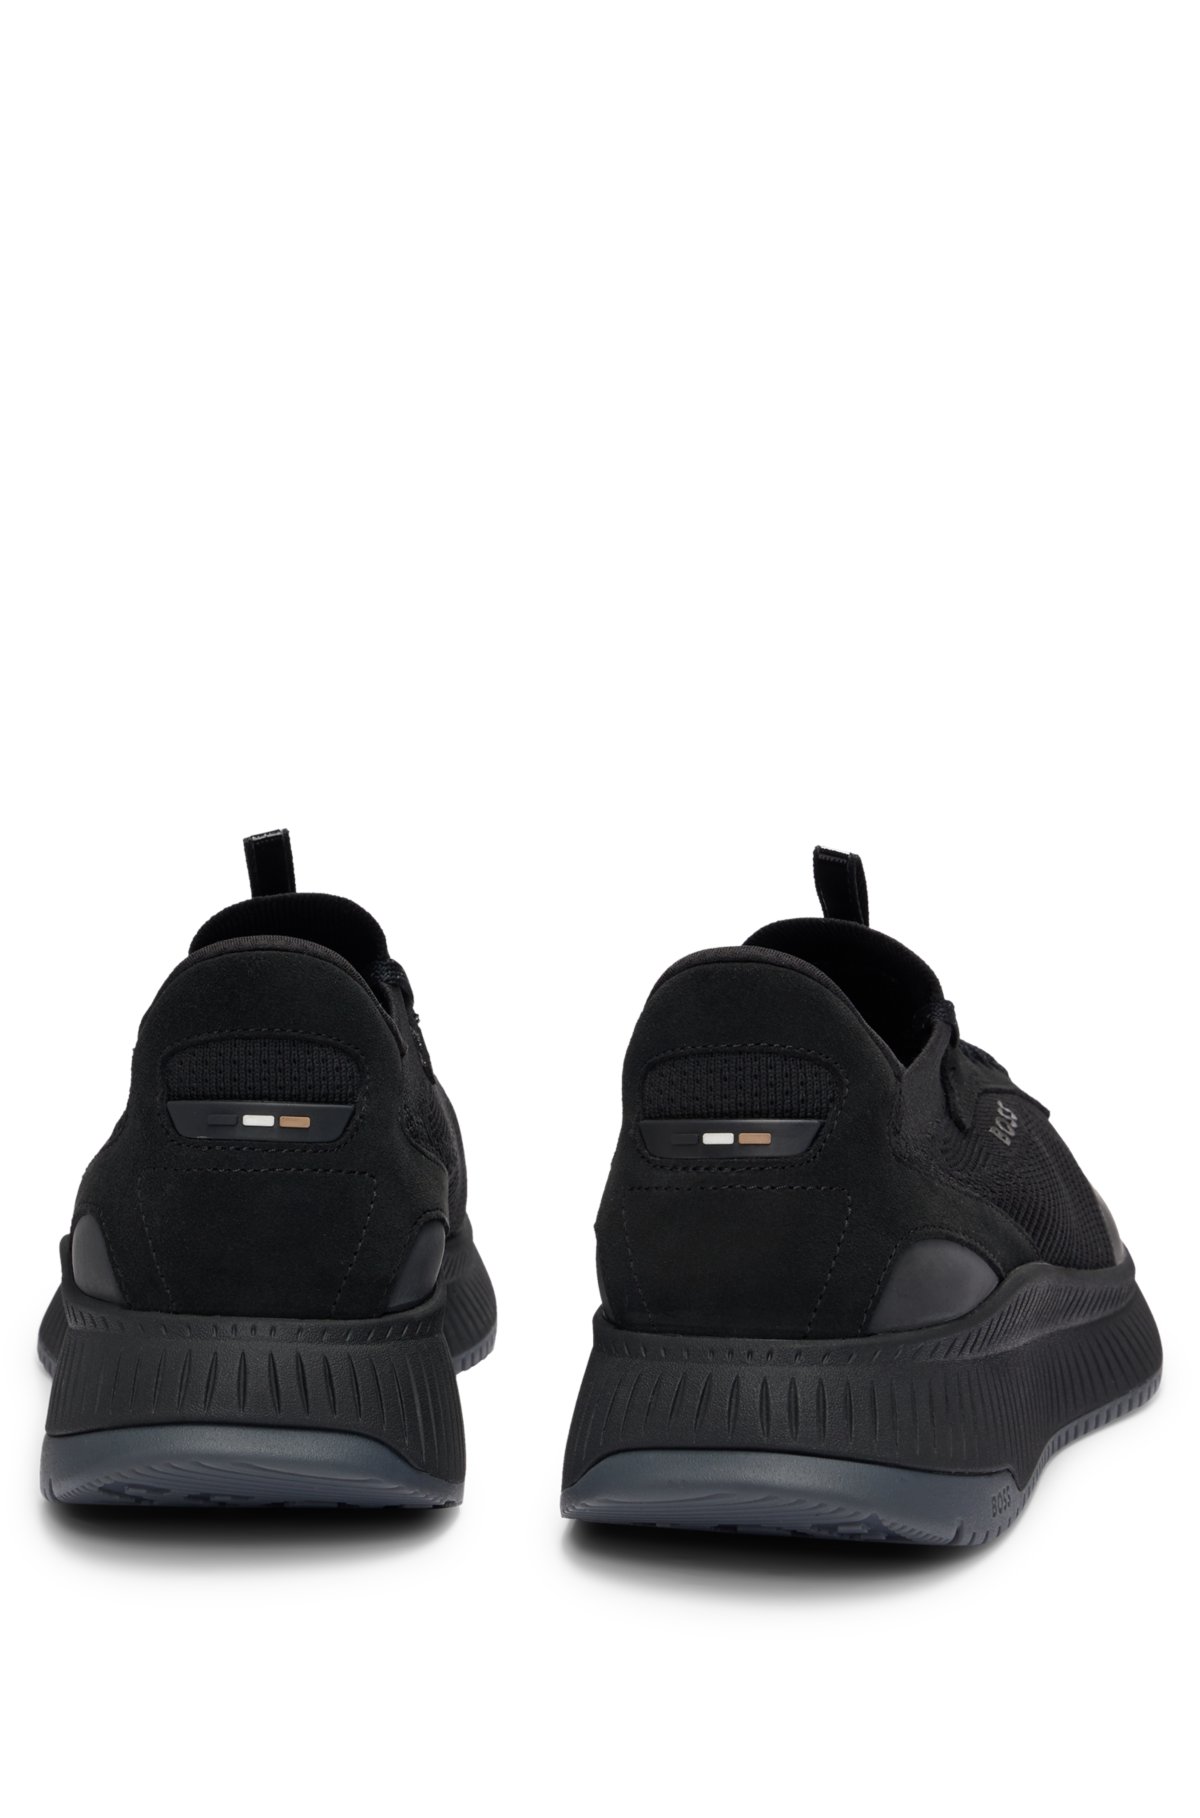 TTNM EVO trainers with knitted upper, Black